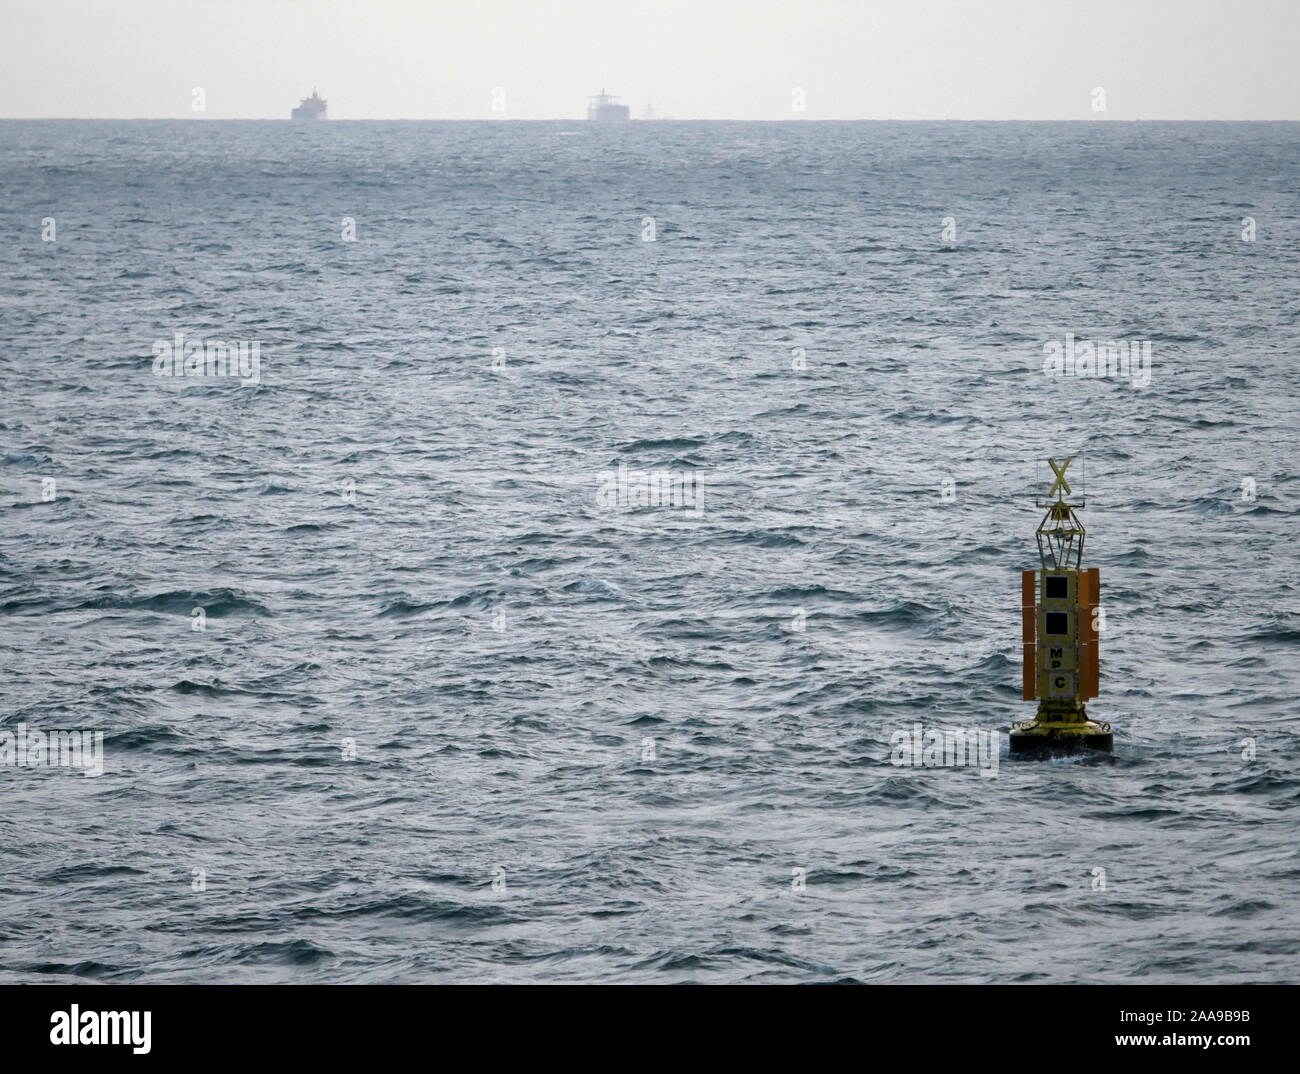 AJAXNETPHOTO. SEPTEMBER, 2019. - ENGLISH CHANNEL. - TRAFFIC SEPARATION SCHEME - MPC BUOY MARKS THE CENTRE OF THE EAST BOUND SHIPPING LANE, OFTEN USED AS TURNNG POINT FOR VESSELS HEADING FOR THE THAMES ESTUARY AND UK EAST COAST.PHOTO:JONATHAN EASTLAND/AJAX REF:GX8_192609_20507 Stock Photo